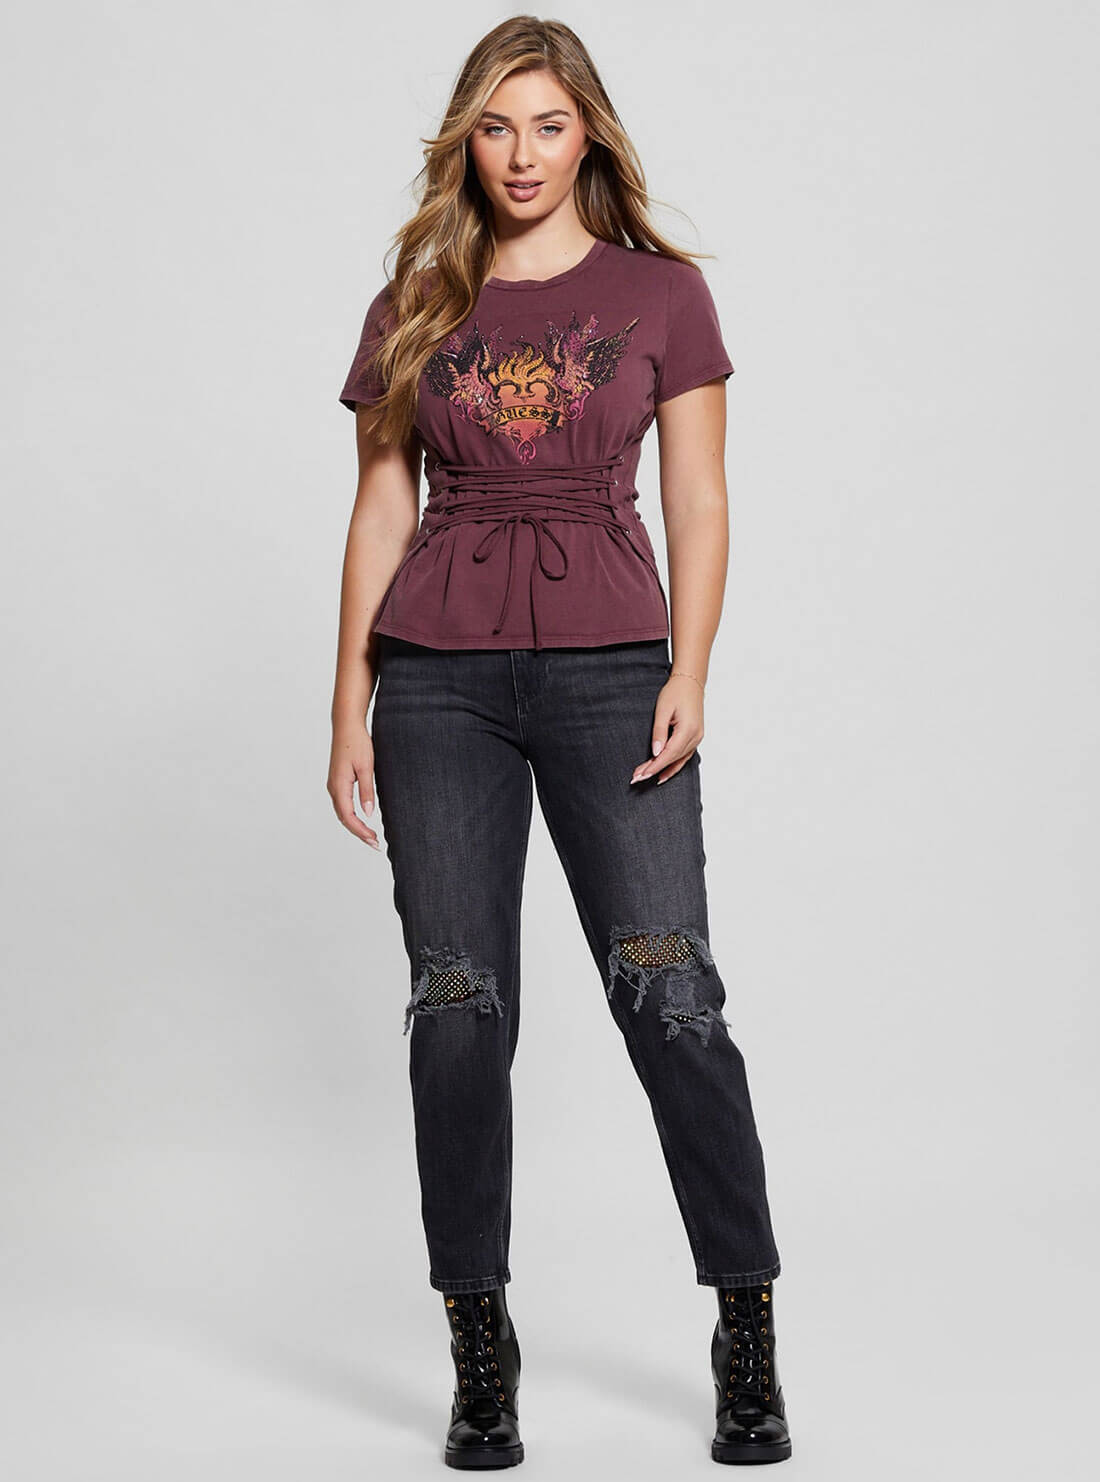 Dark Purple Heart Aflame Graphic Lace-up T-Shirt | GUESS Women's | full view